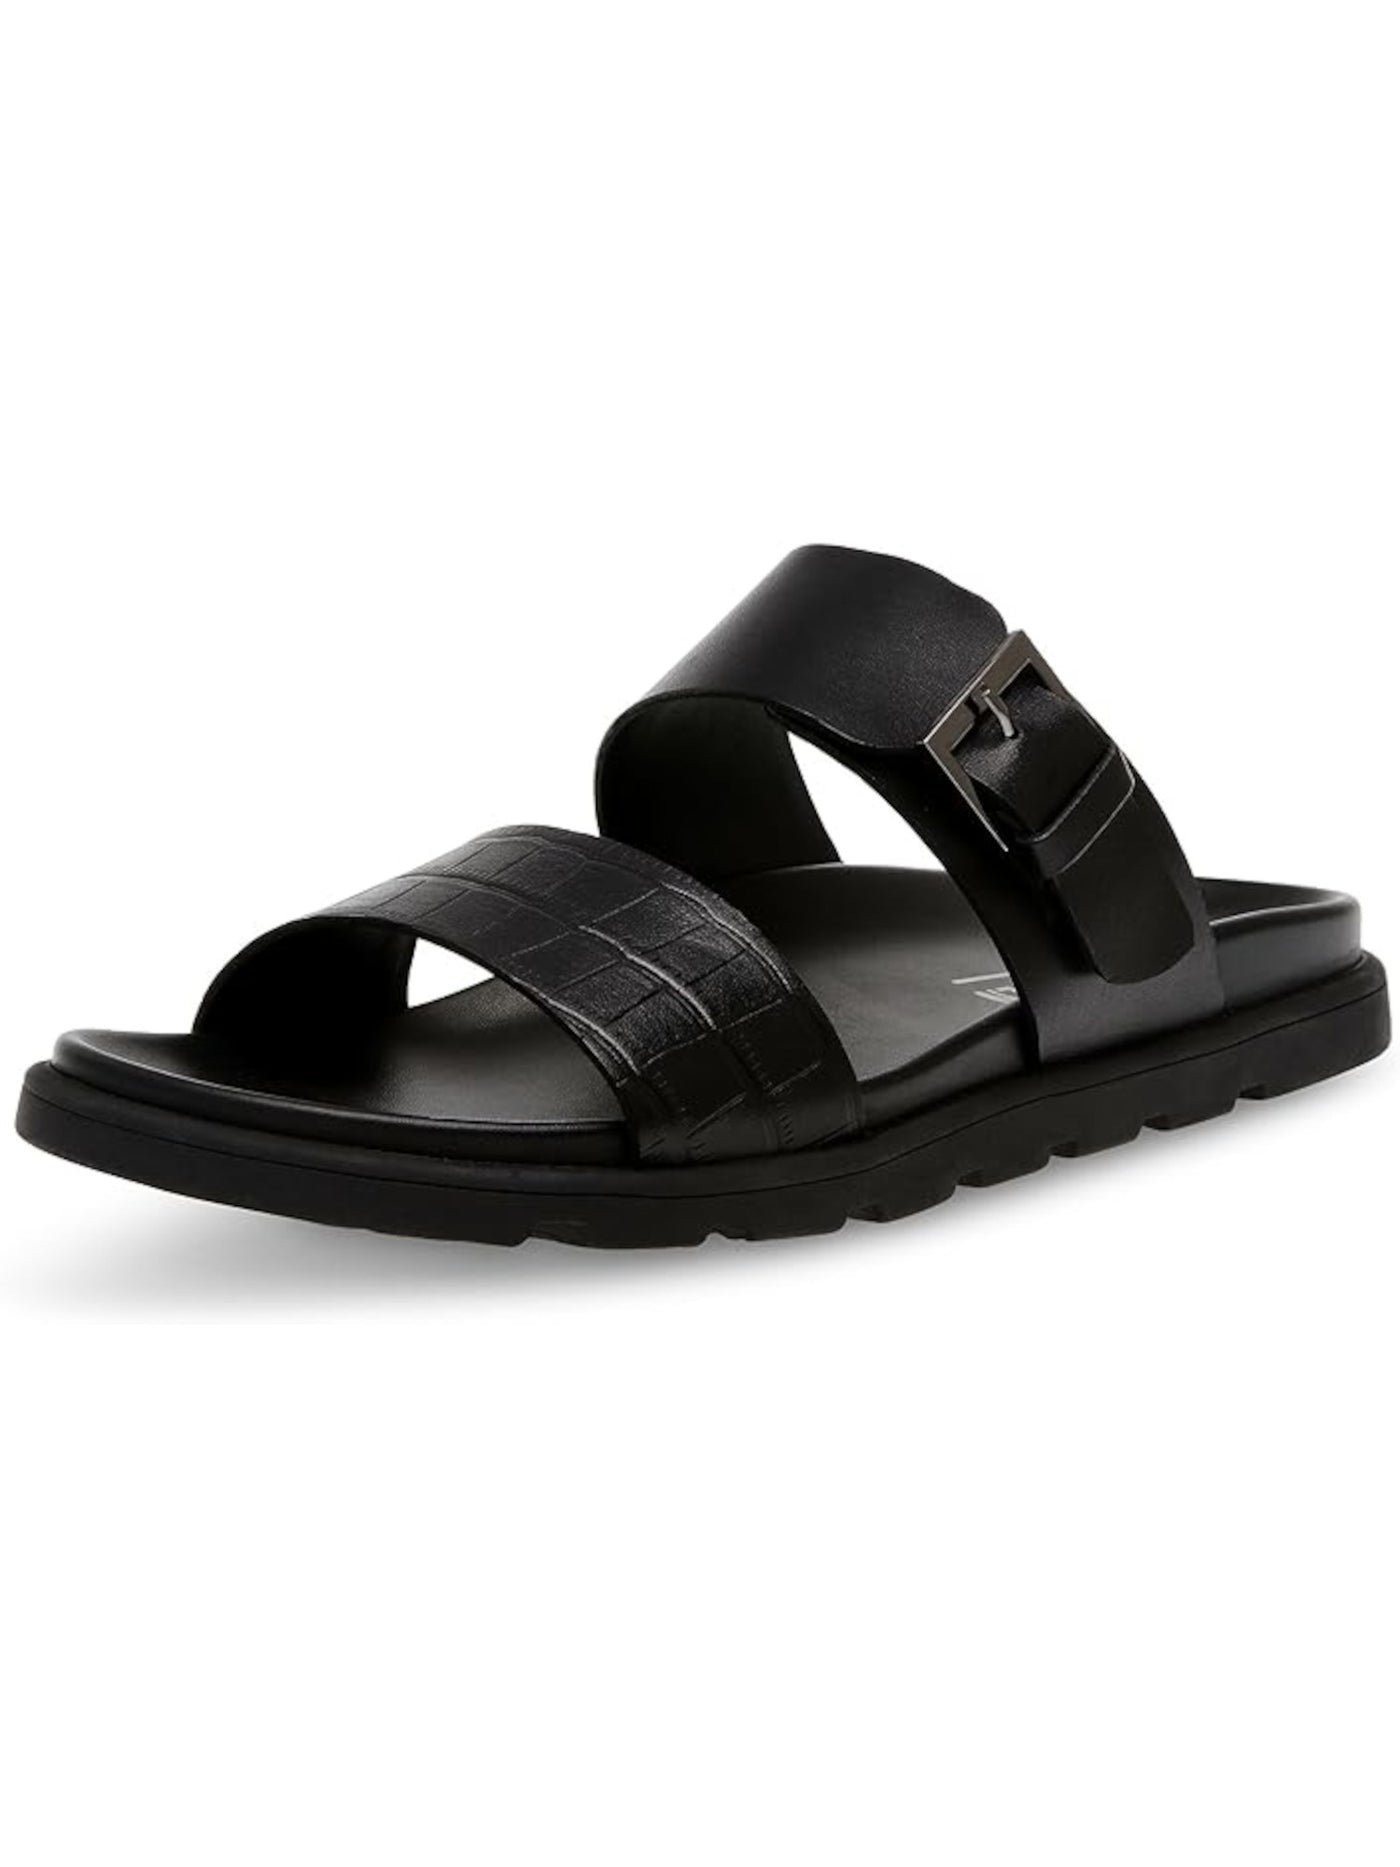 STEVE MADDEN Mens Black Embossed Front Strap Corro Round Toe Buckle Leather Sandals Shoes 8.5 M